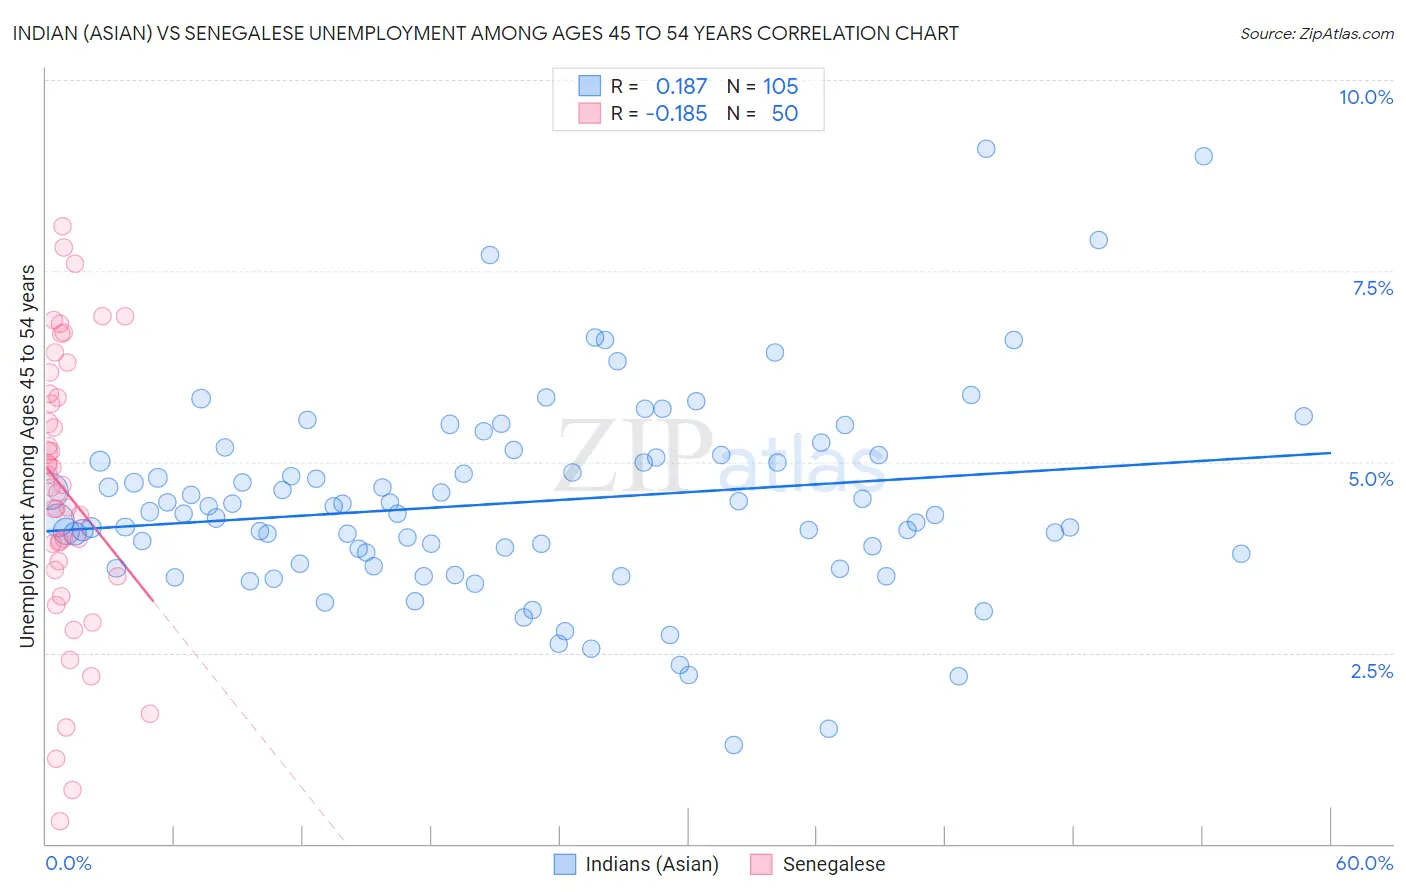 Indian (Asian) vs Senegalese Unemployment Among Ages 45 to 54 years